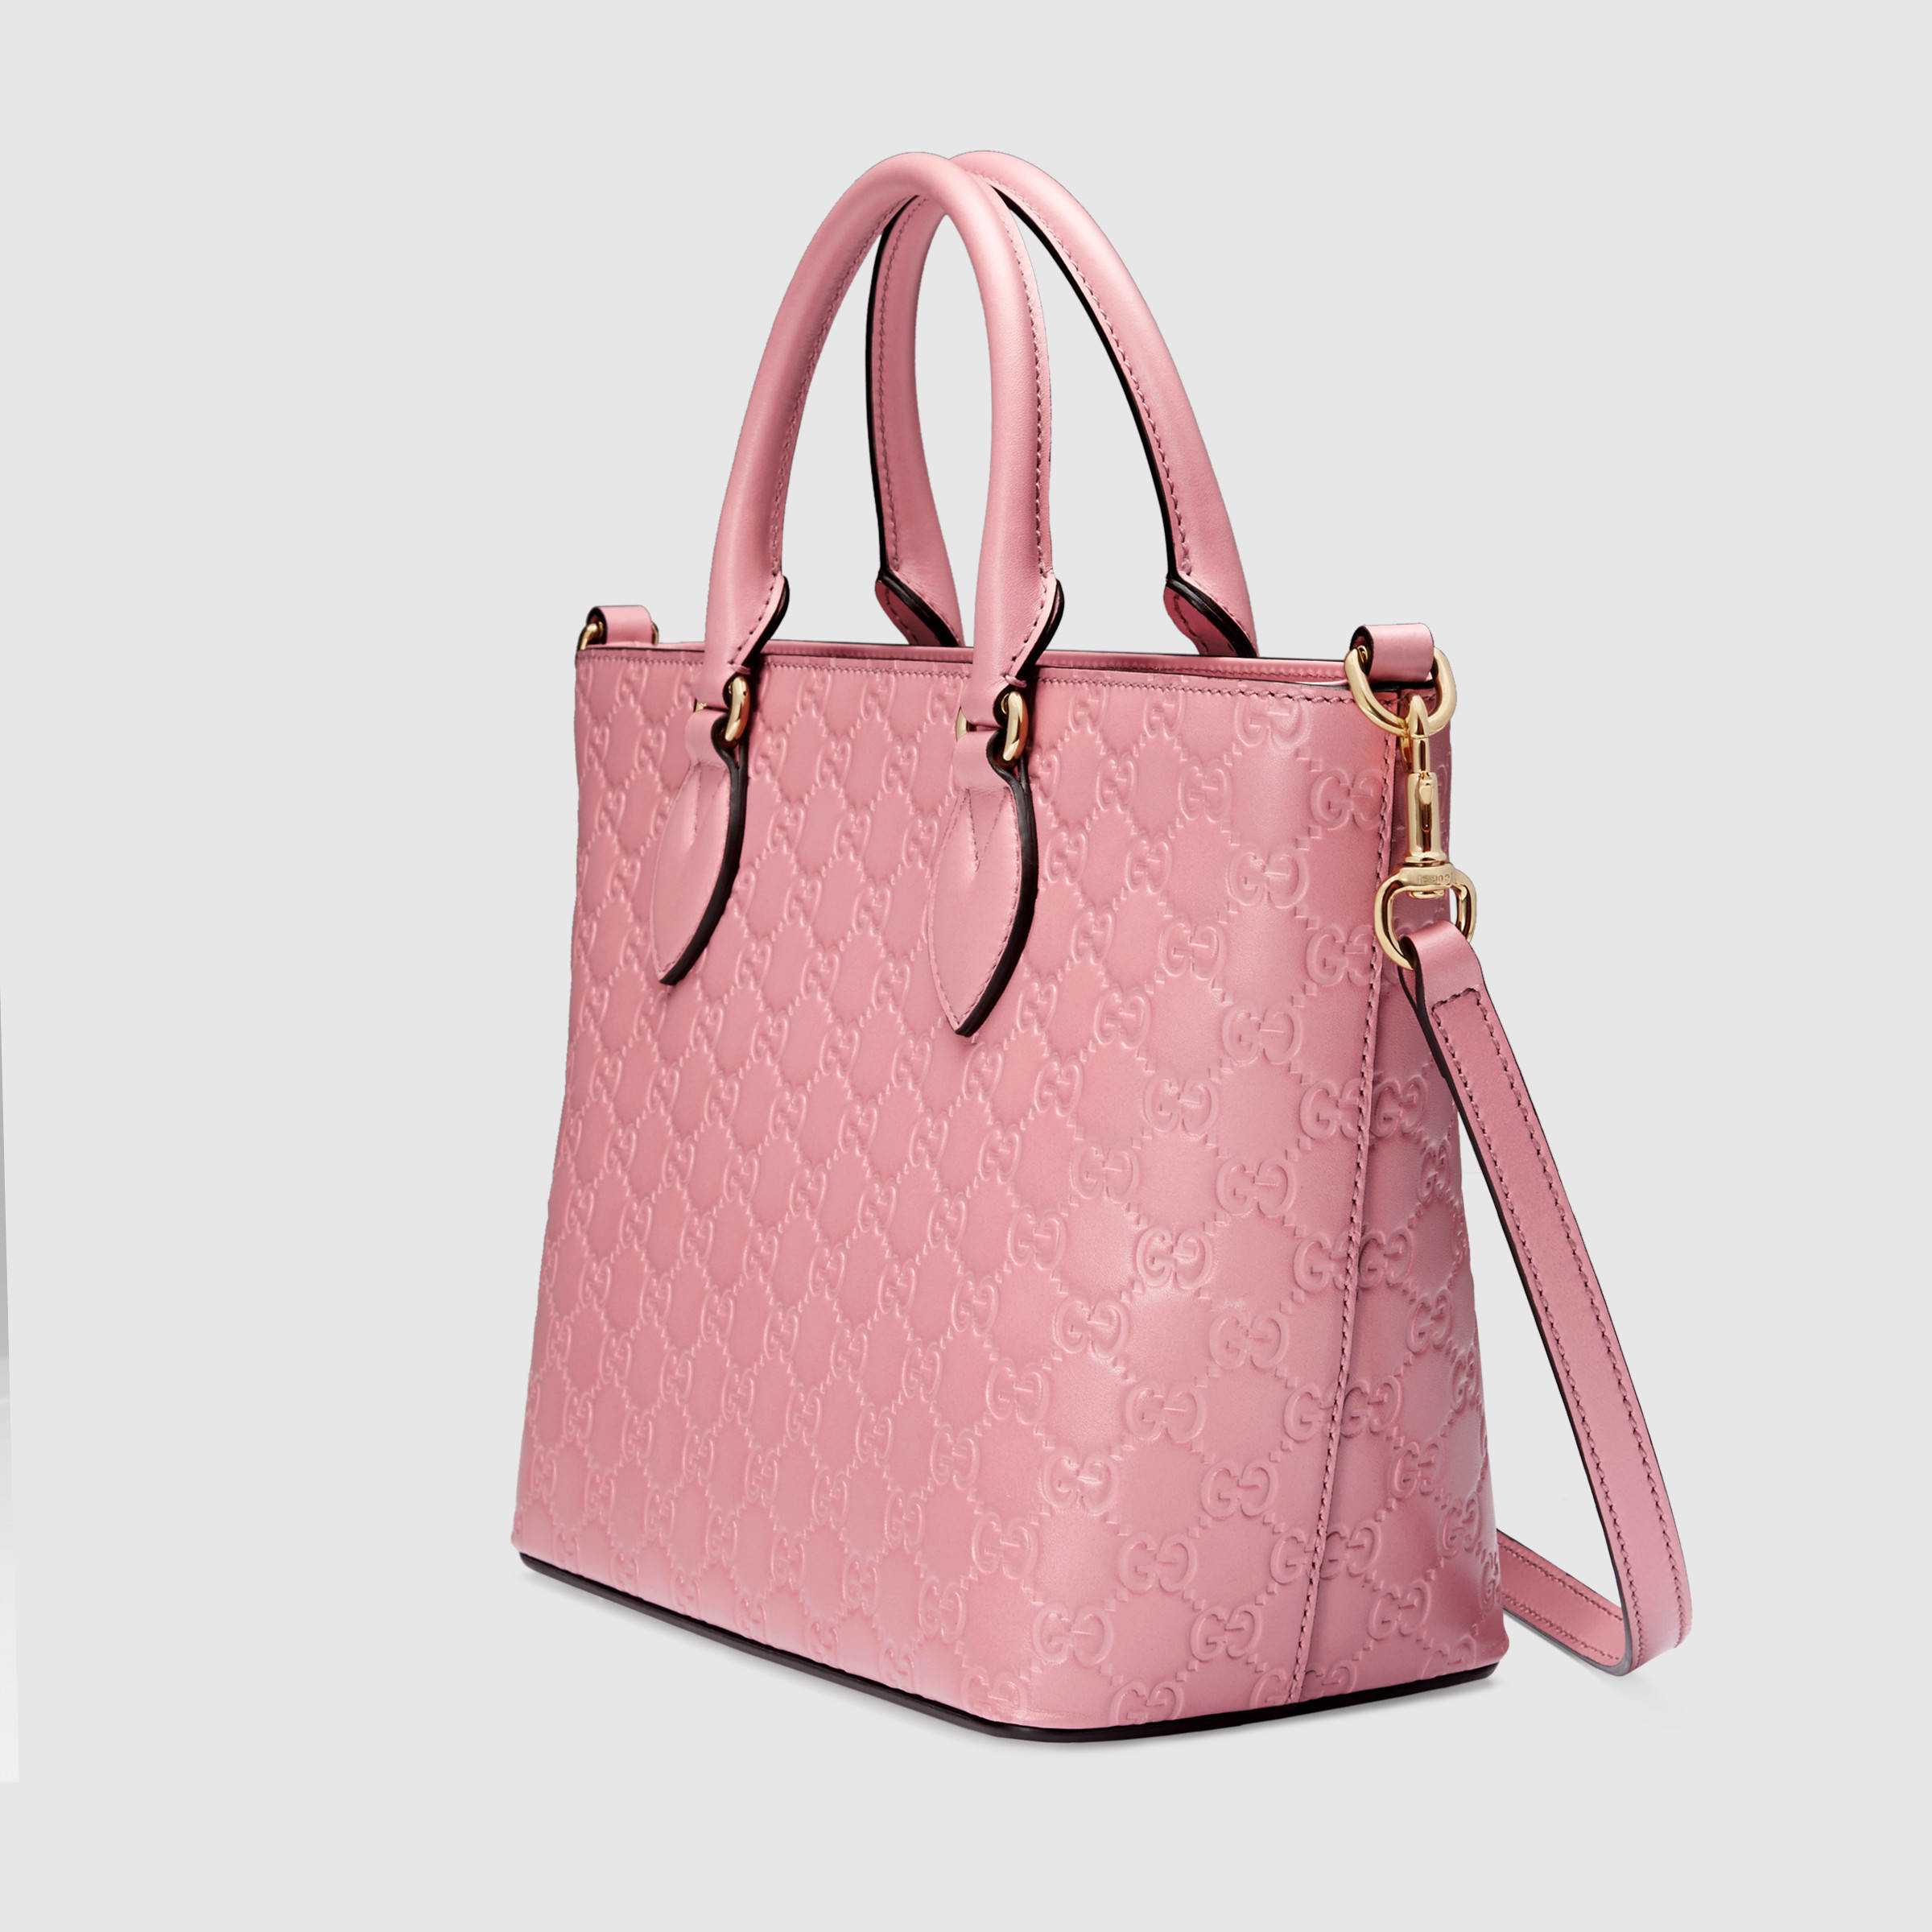 Gucci Signature Leather Tote in Pink - Lyst